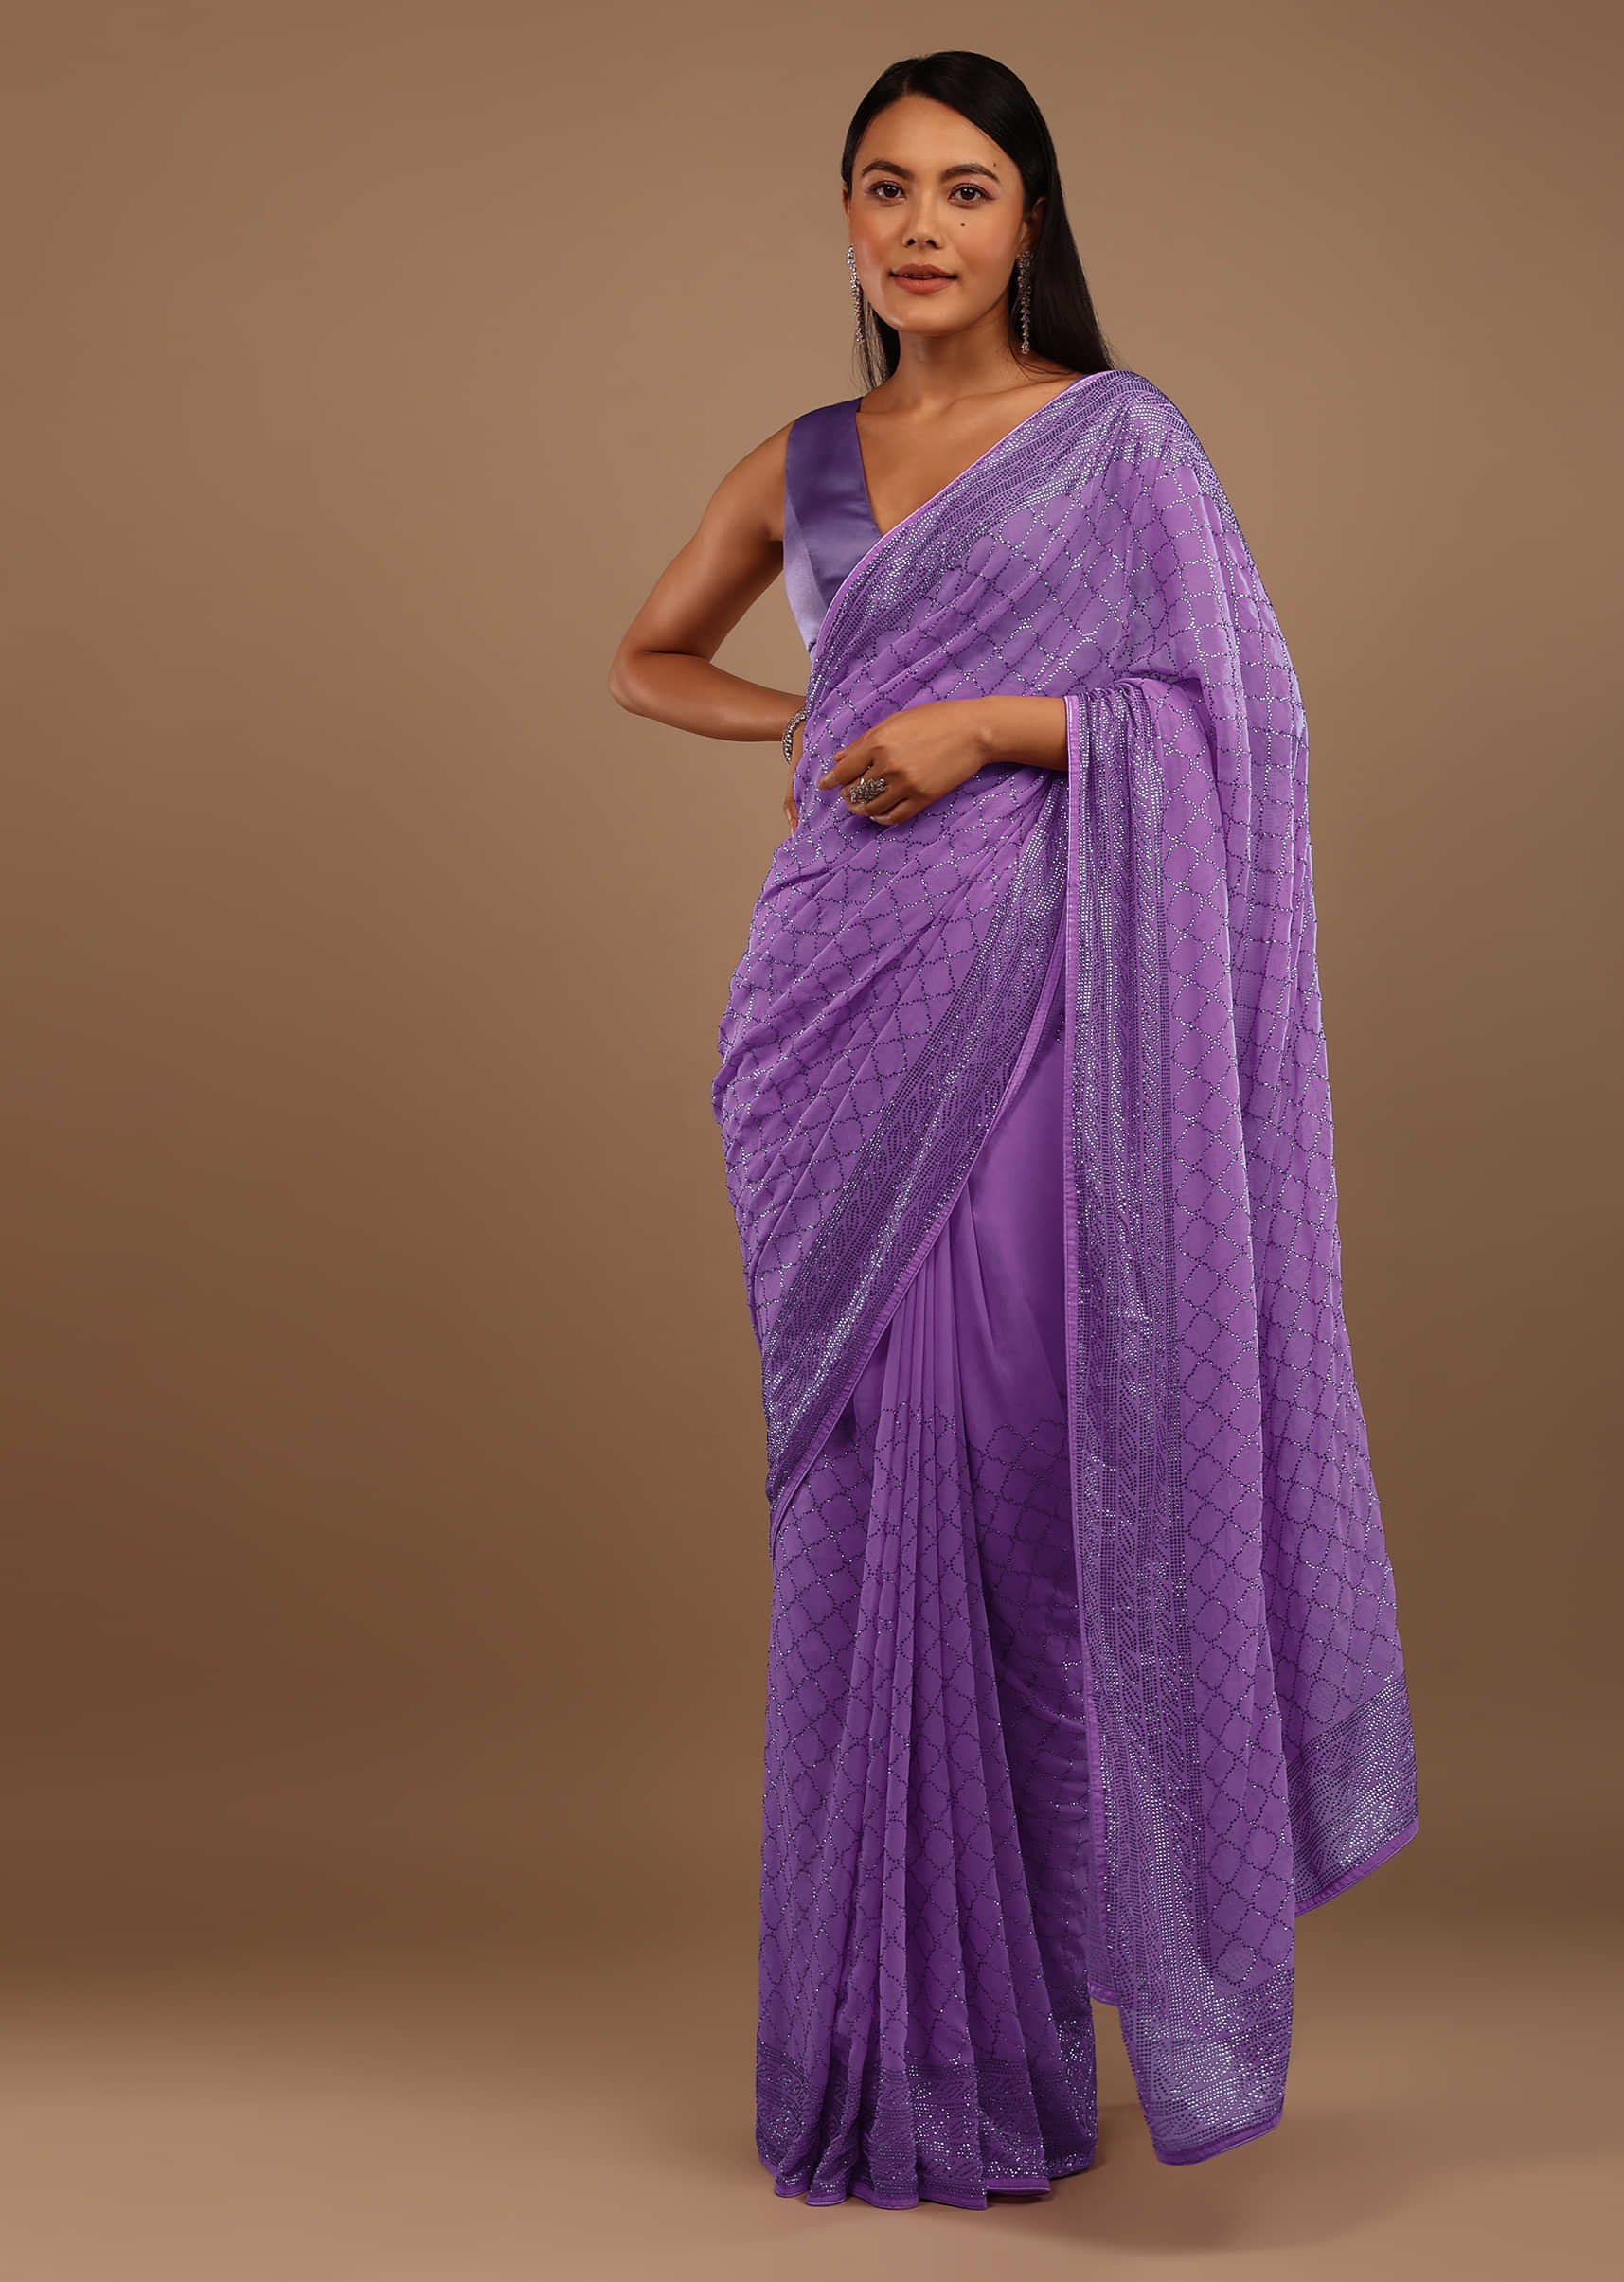 Light Purple Satin Saree With Swarovski Stonework On The Borders And A Stonework Added Unstitched Blouse